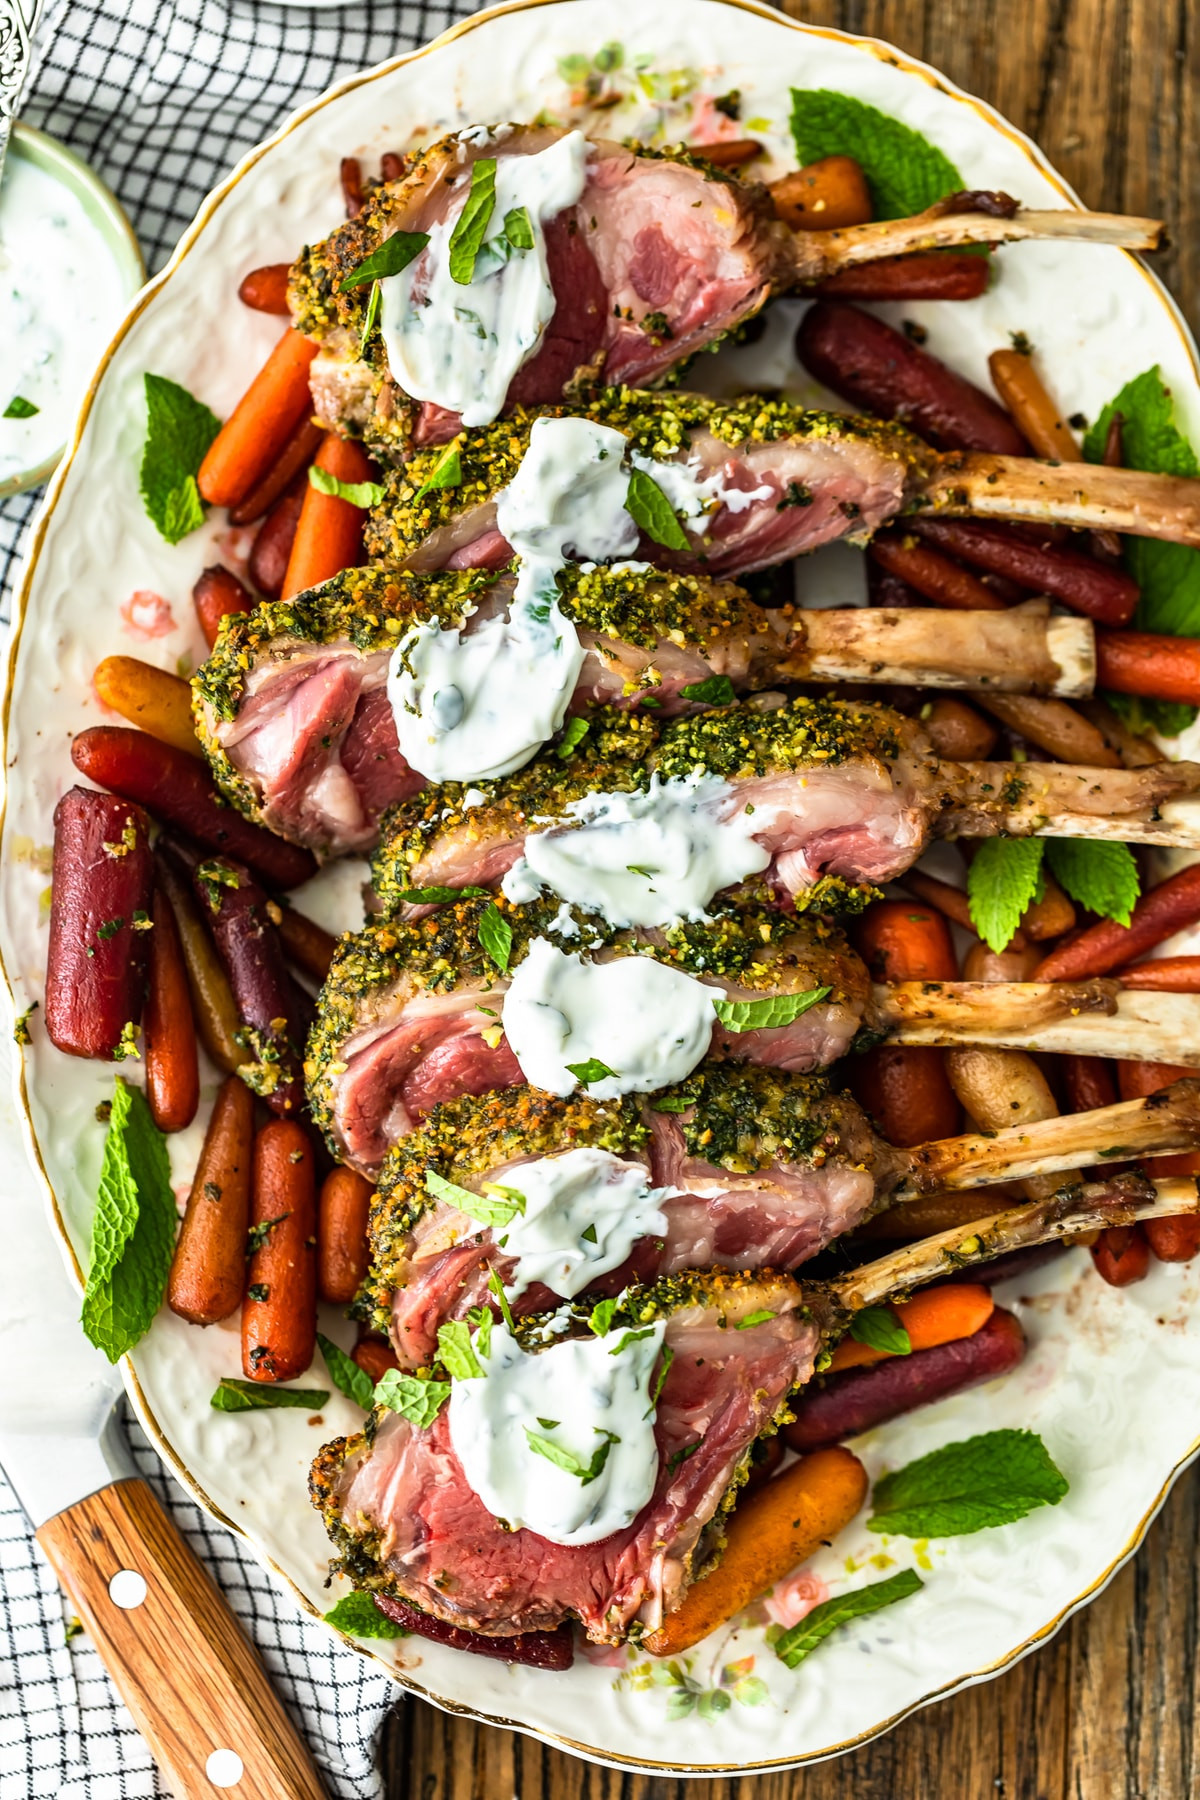 Side Dishes For Rack Of Lamb
 Herb Crusted Rack of Lamb Recipe with Mint Yogurt Sauce